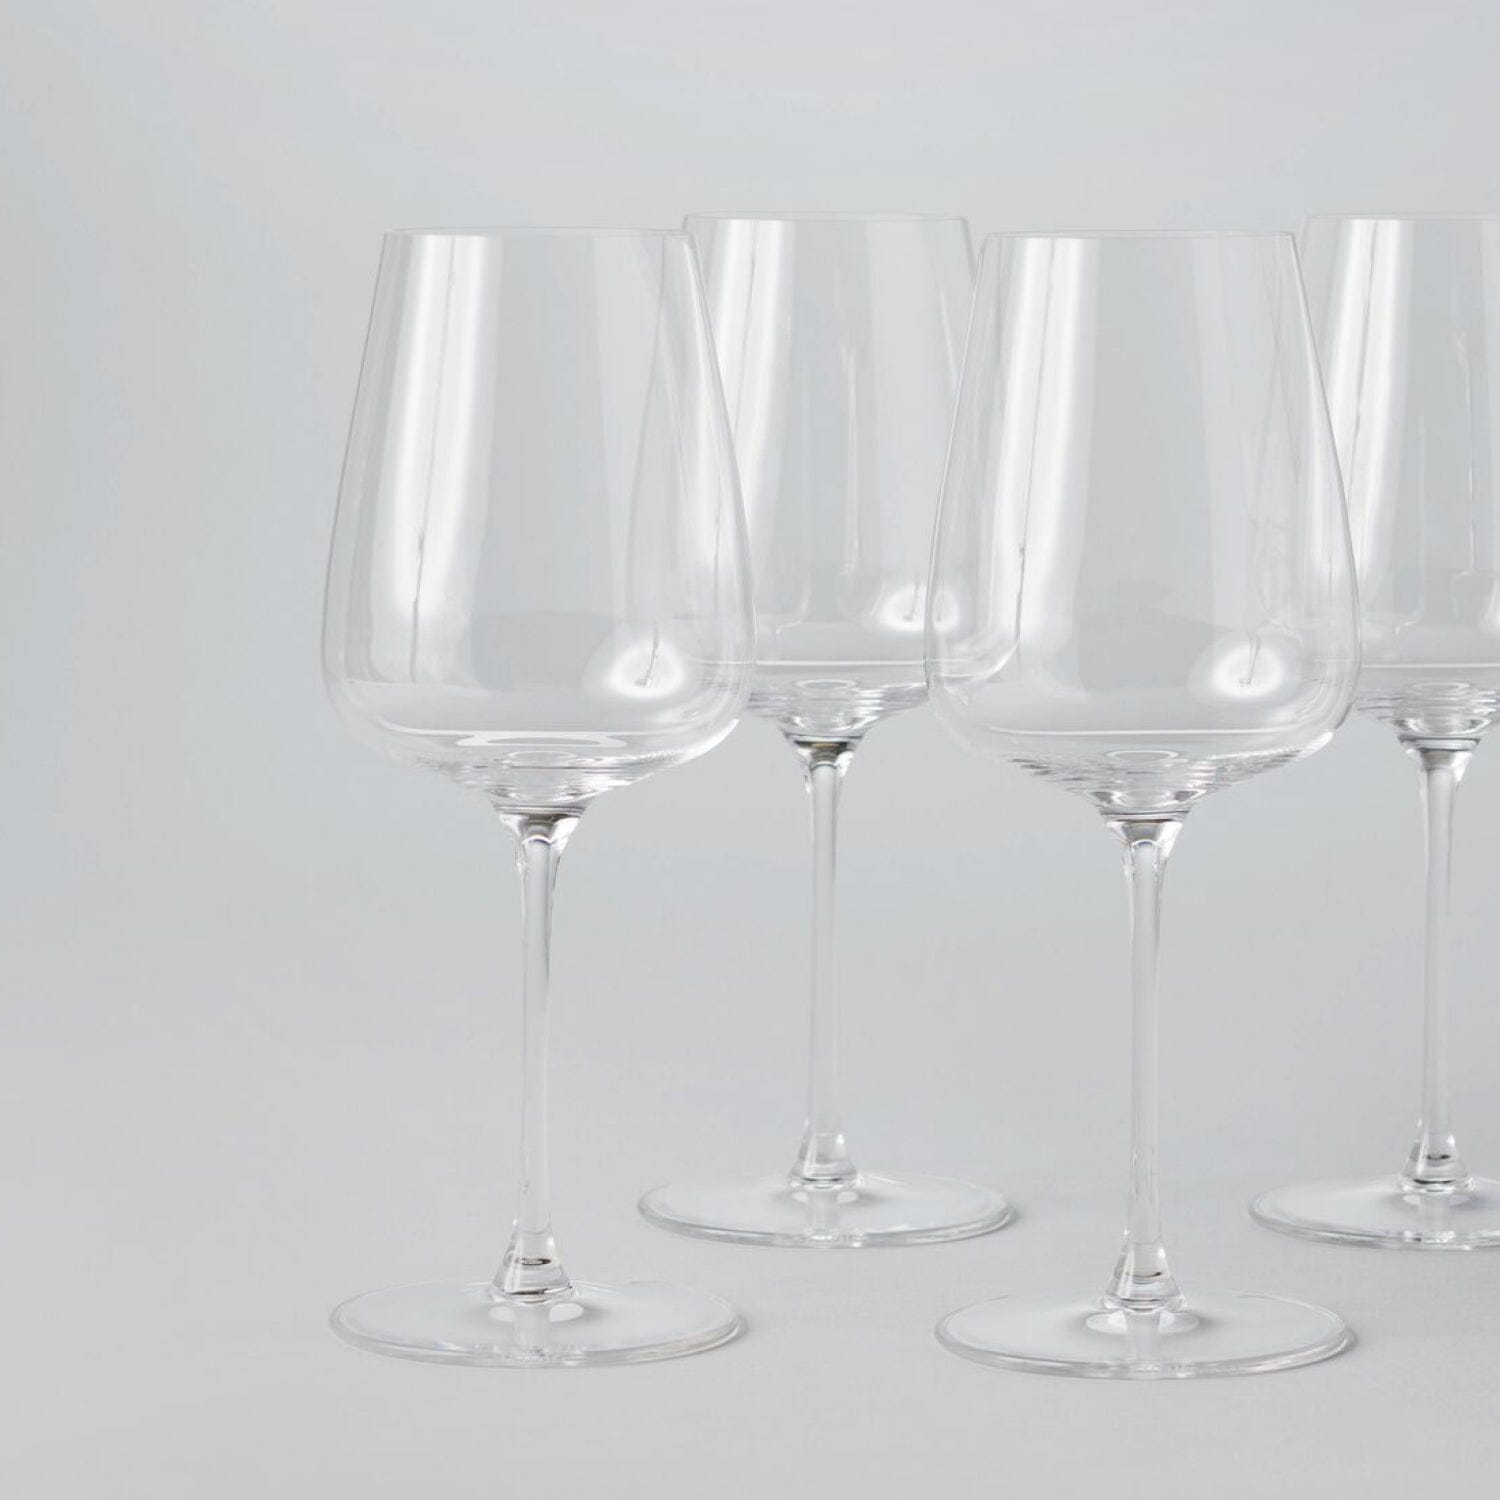 The Wine Glasses Glassware Fable Home #clear